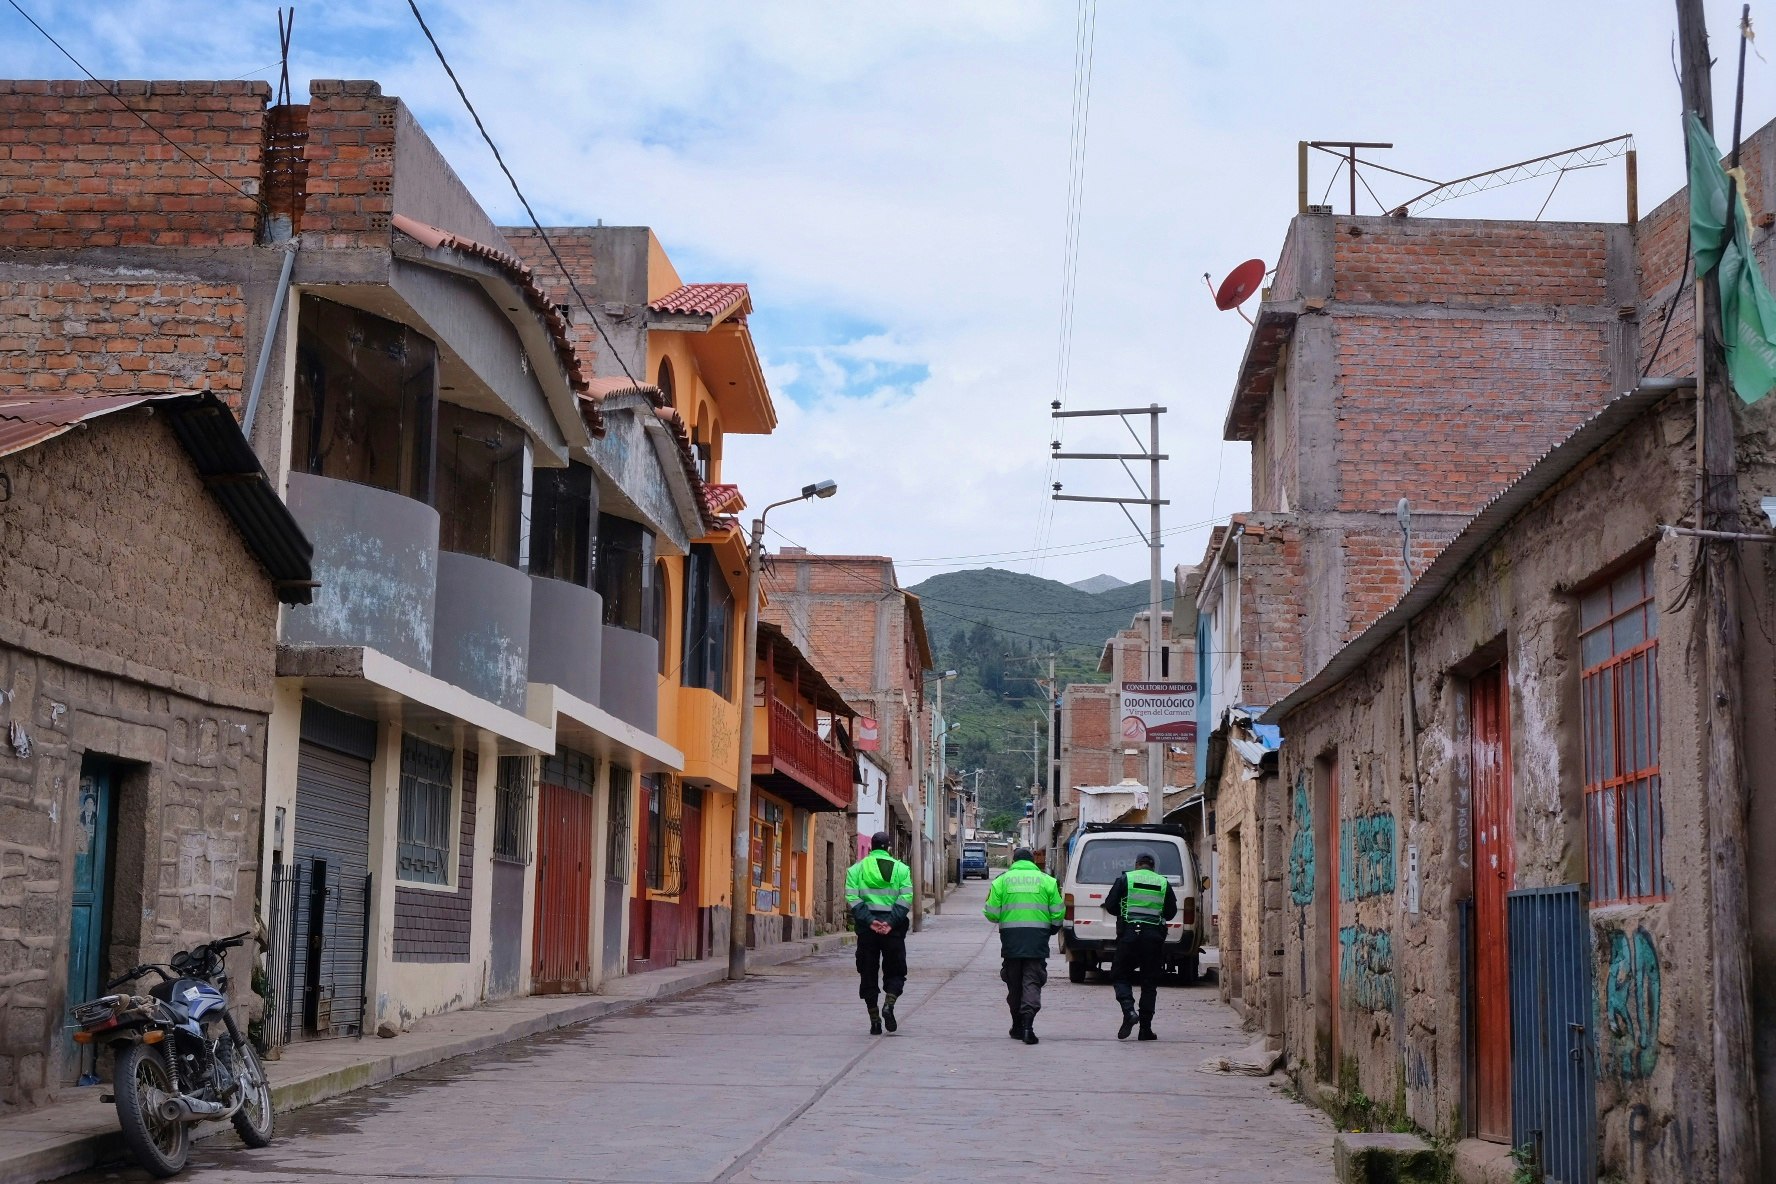 Three police officers in highvis green jackets walk down an empty road in the town of Cabanaconde, Peru.